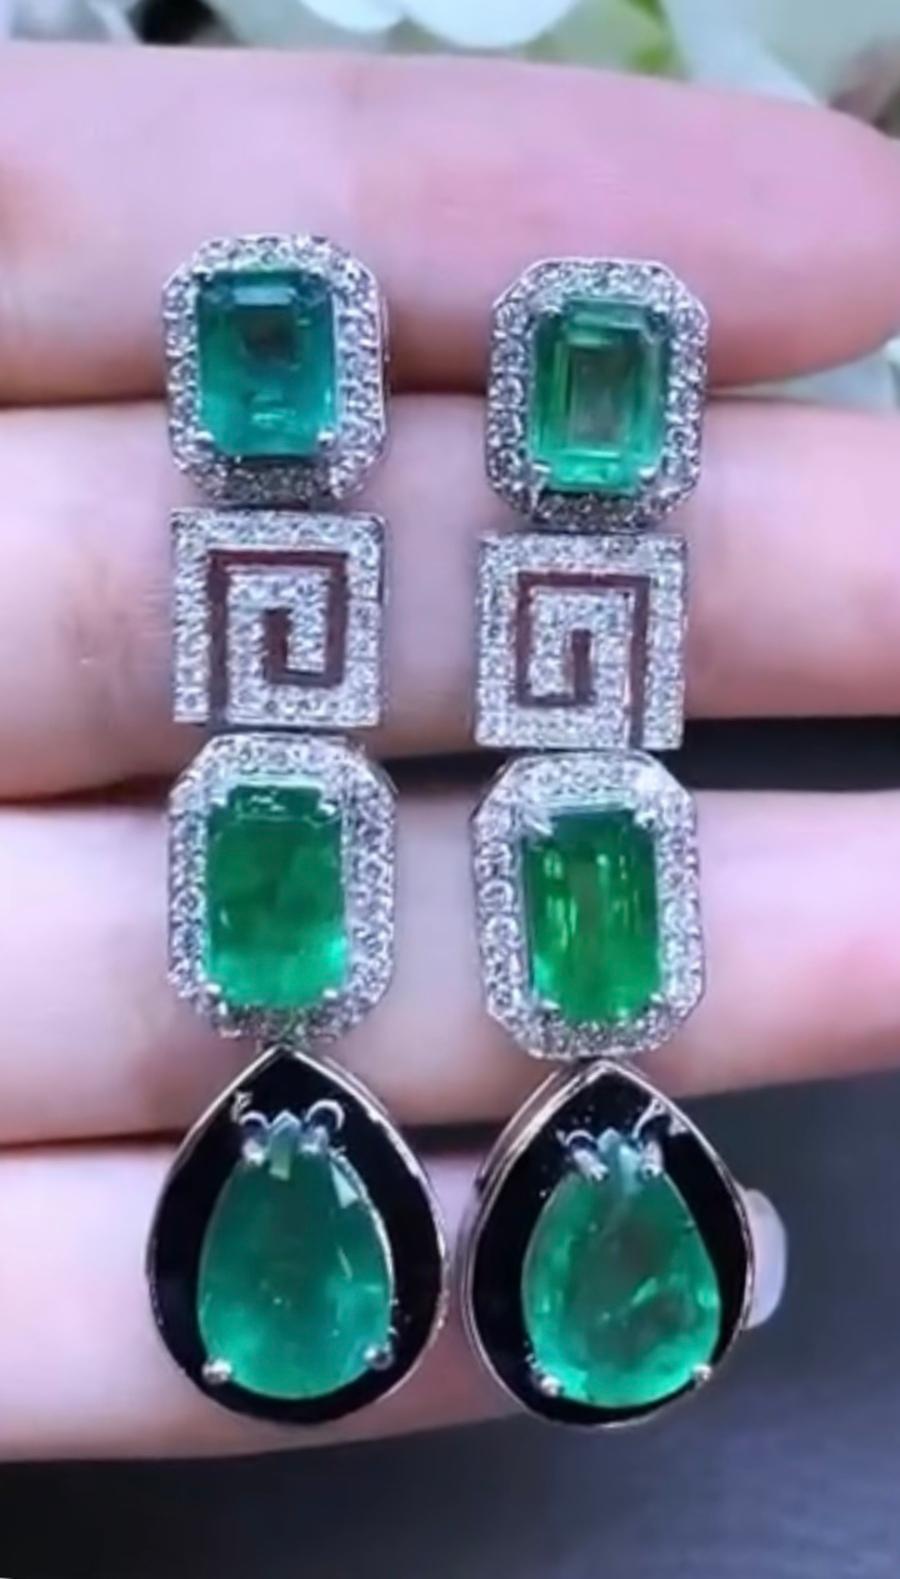 Stunning design handmade by artisan goldsmith, in 18k gold with 6 pieces of natural Zambia emeralds ct 13,79 and natural diamonds round brilliant cut ct 1,45 E-F/VS.
Excellent manufacture.
Handmade by artisan goldsmith.